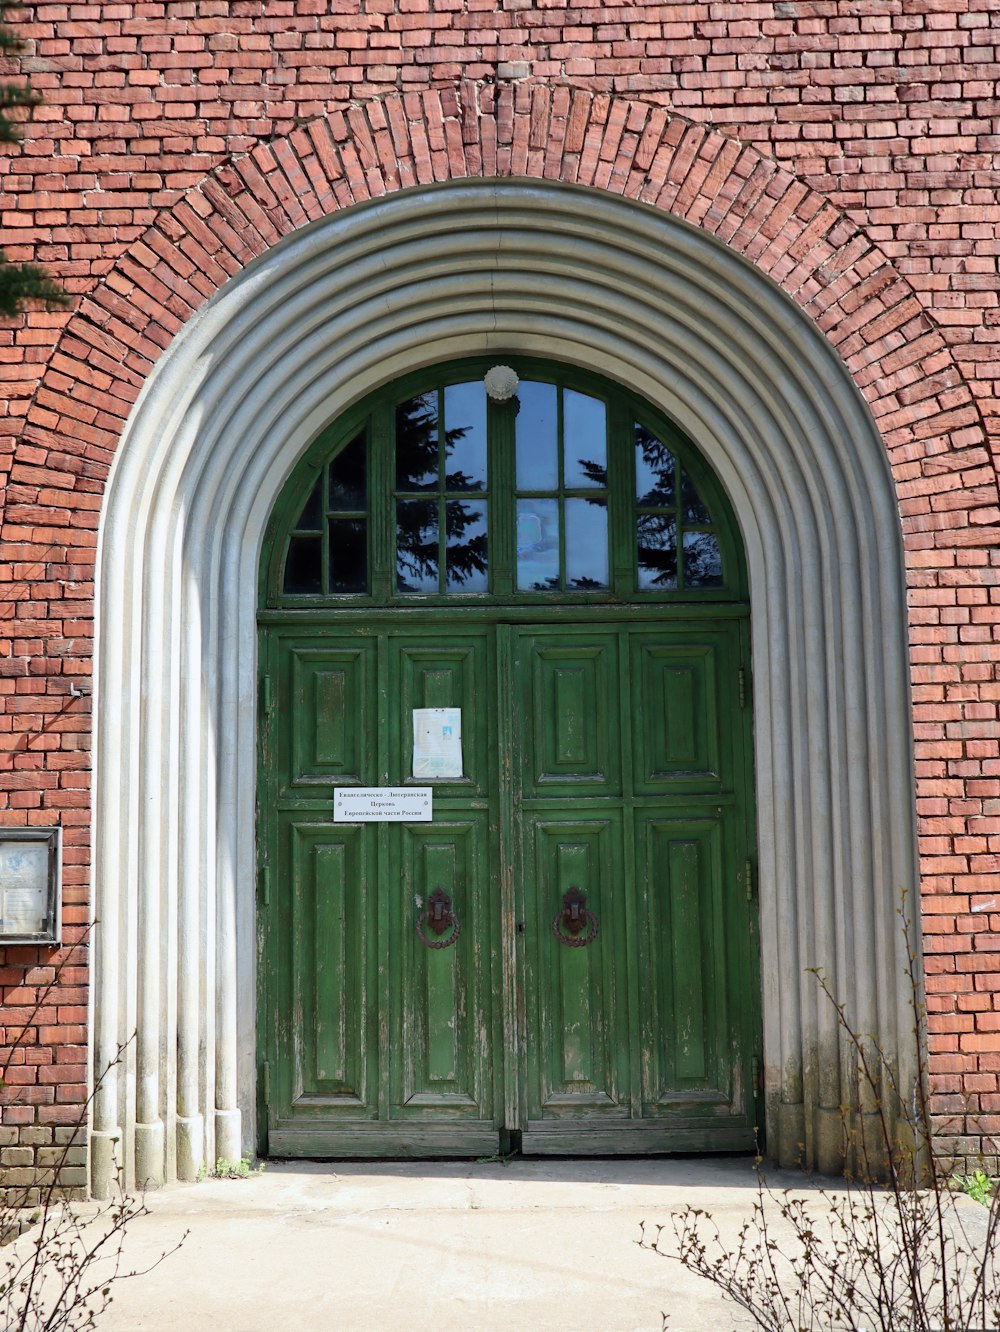 a large green door with arched windows on a brick building